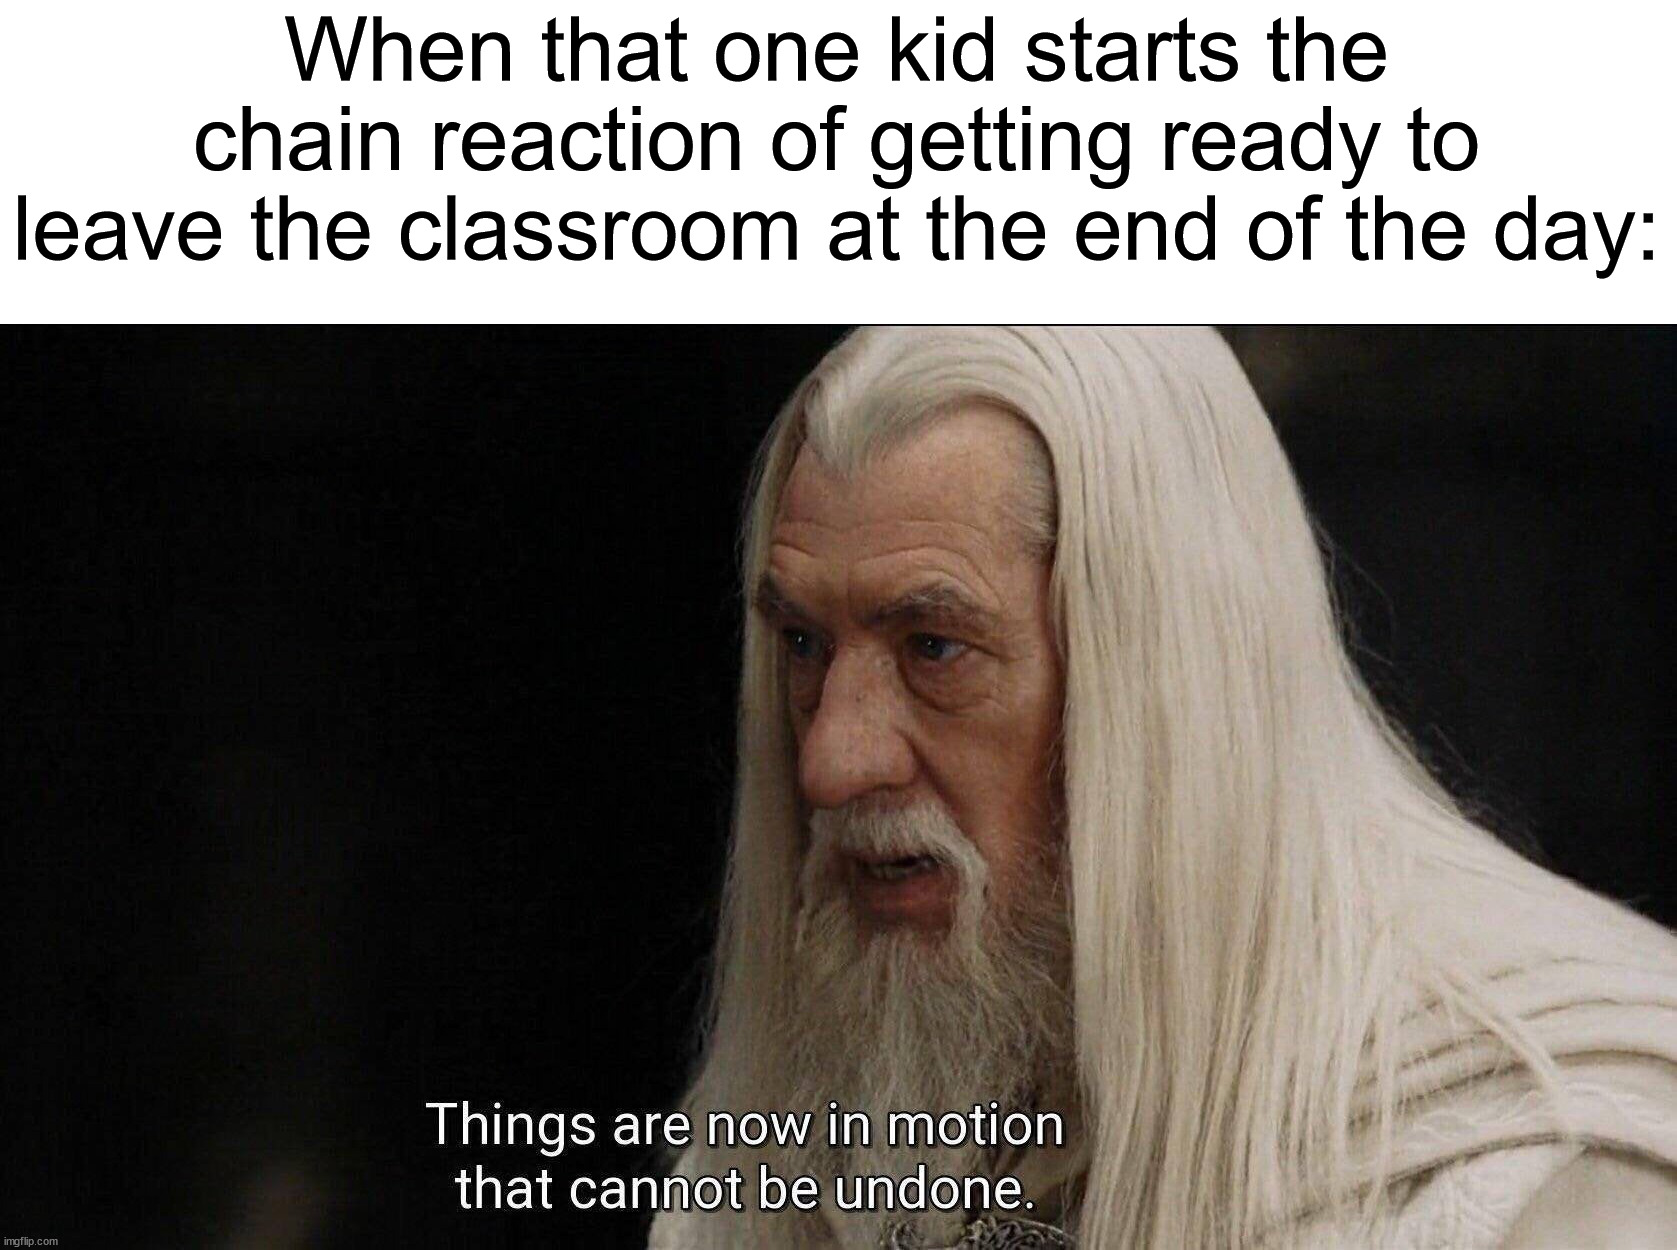 I'm usually one of these people...hbu? ψ(｀∇´)ψ | When that one kid starts the chain reaction of getting ready to leave the classroom at the end of the day: | image tagged in gandalf cannot be undone,memes,funny,true story,relatable memes,school | made w/ Imgflip meme maker